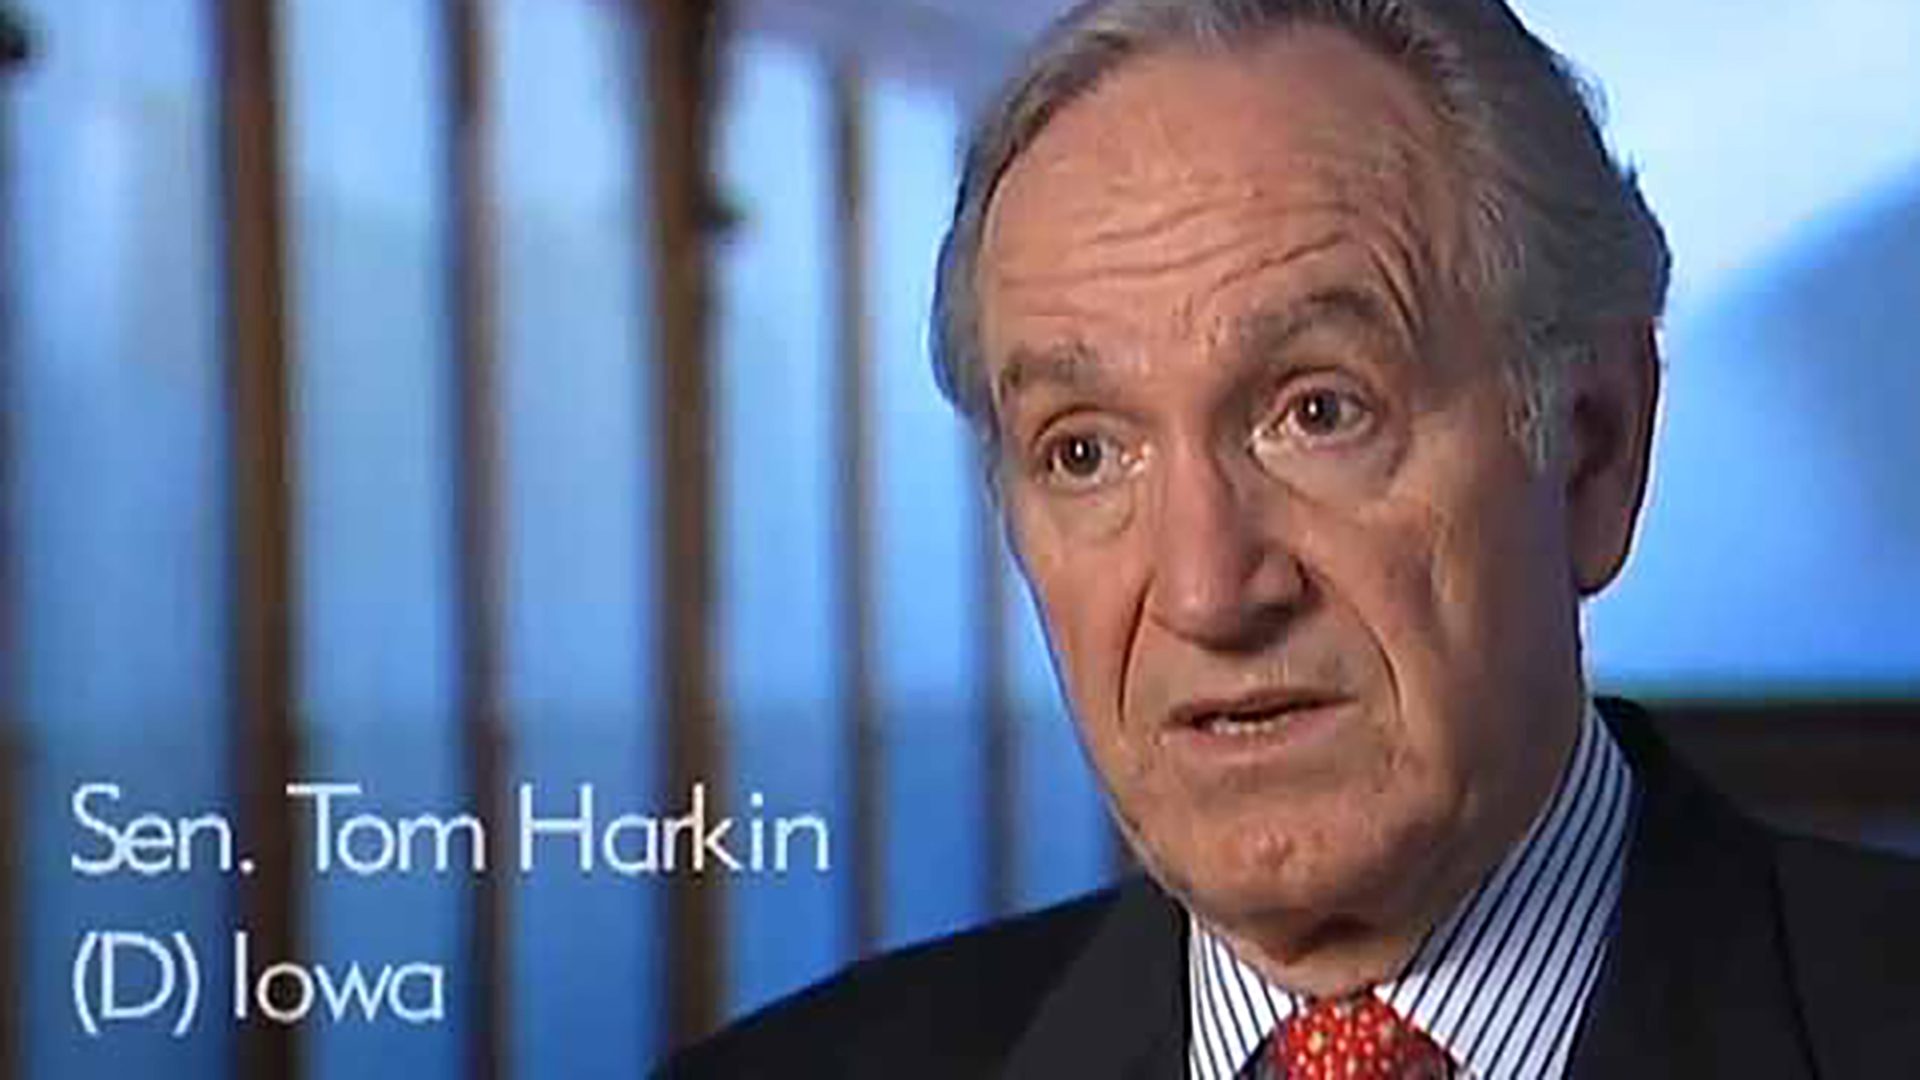 A professional senior man is interviewed against a blue background. Text on the image says Sen. Tom Harkin (D) Iowa.